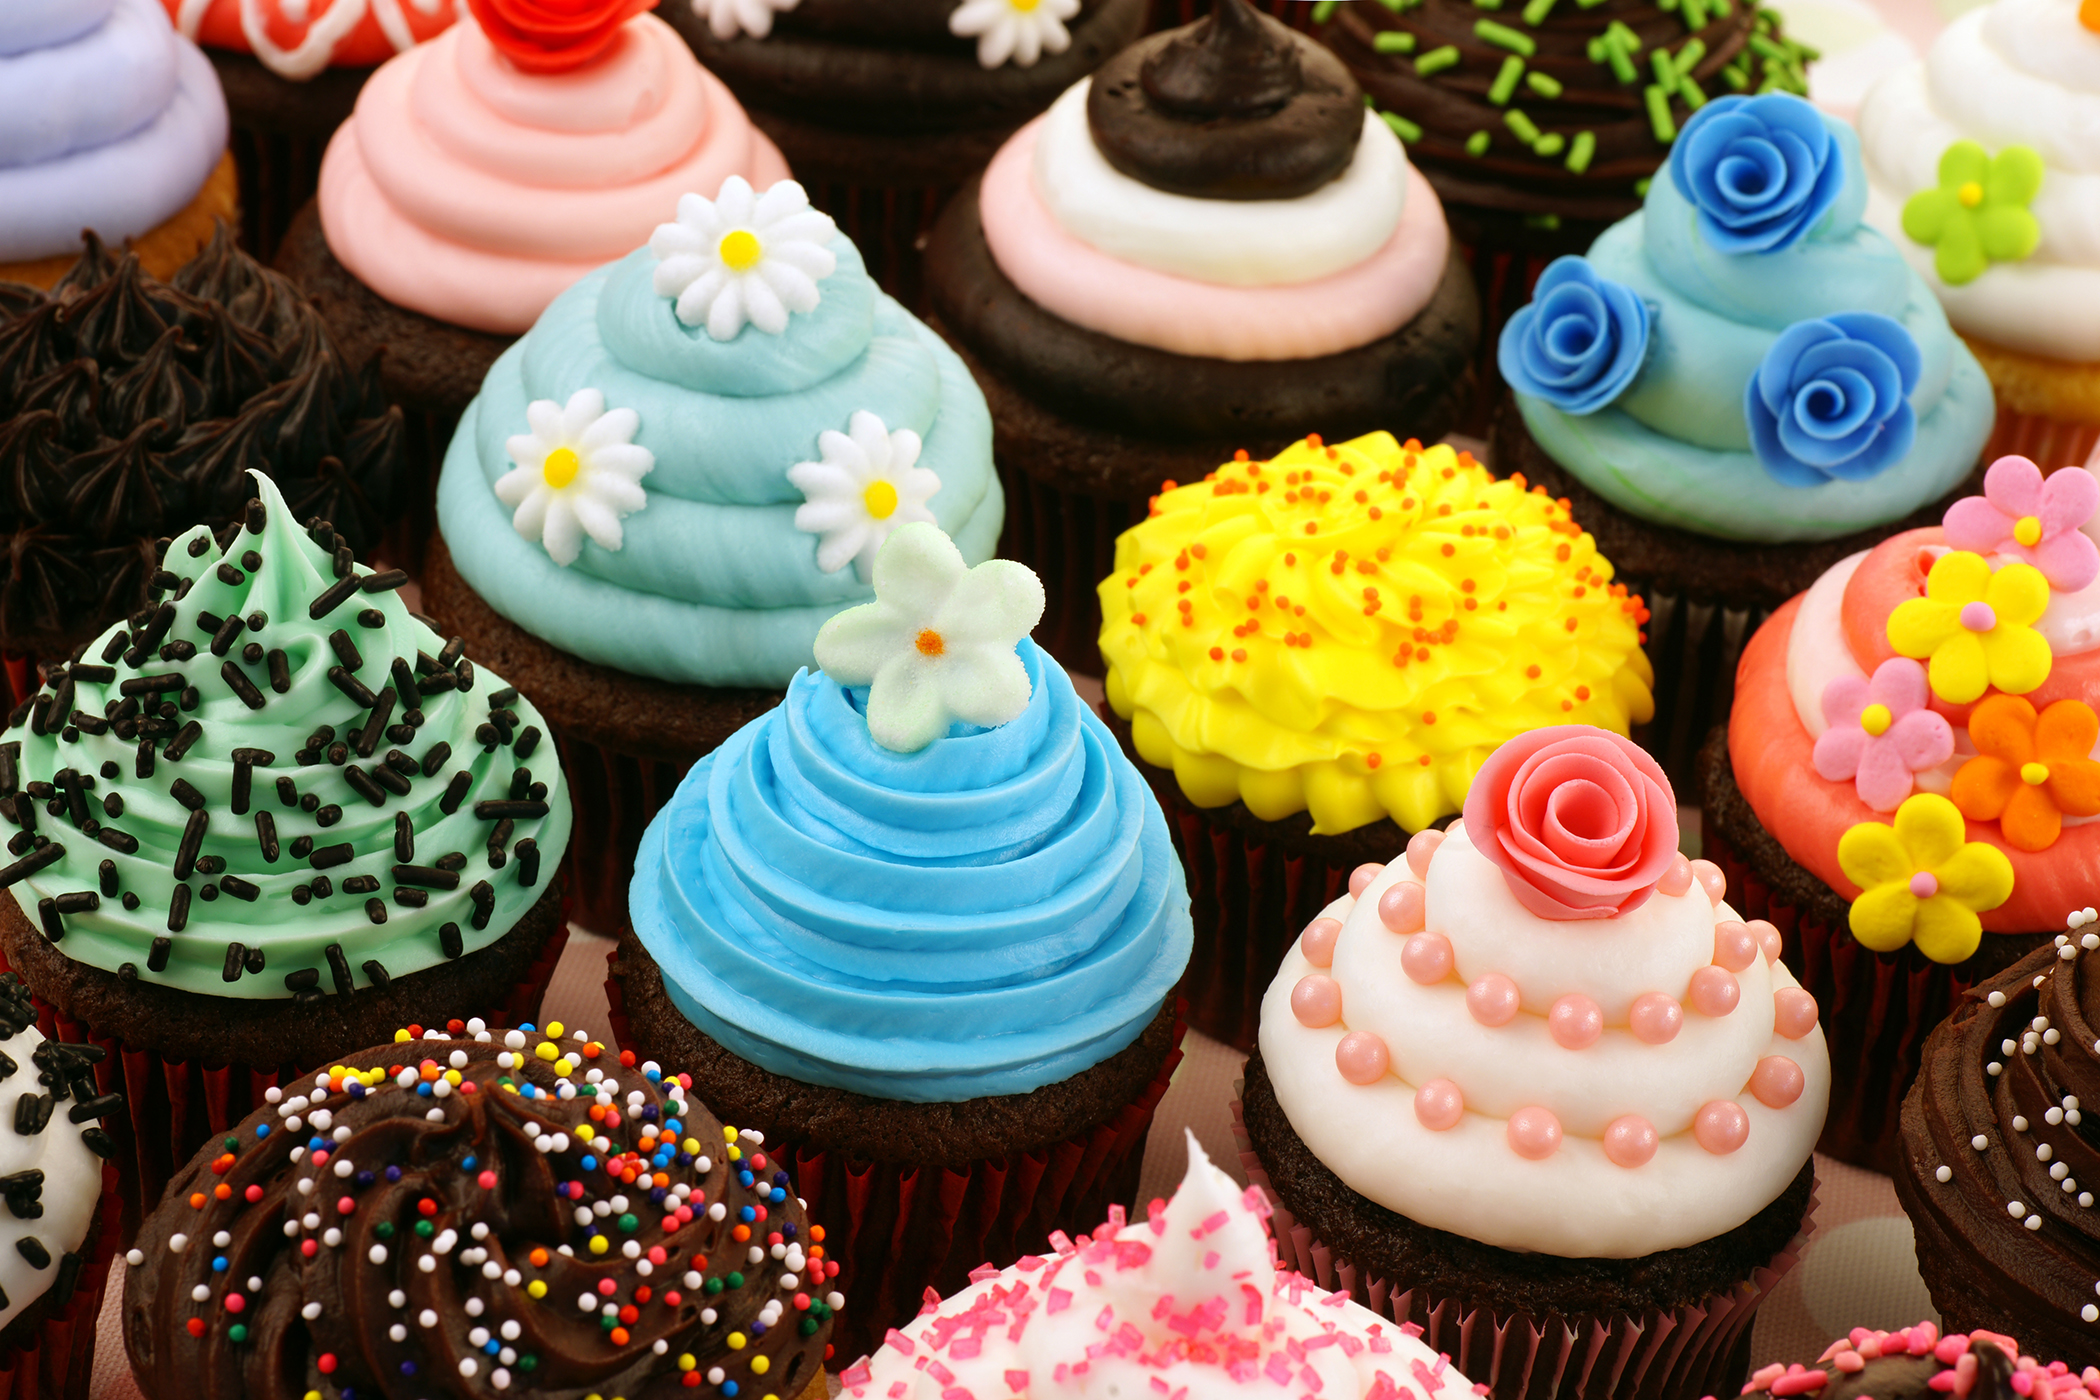 Alert! Walmart Is Having a Birthday Party Sunday and Everybody Gets Free Cupcakes